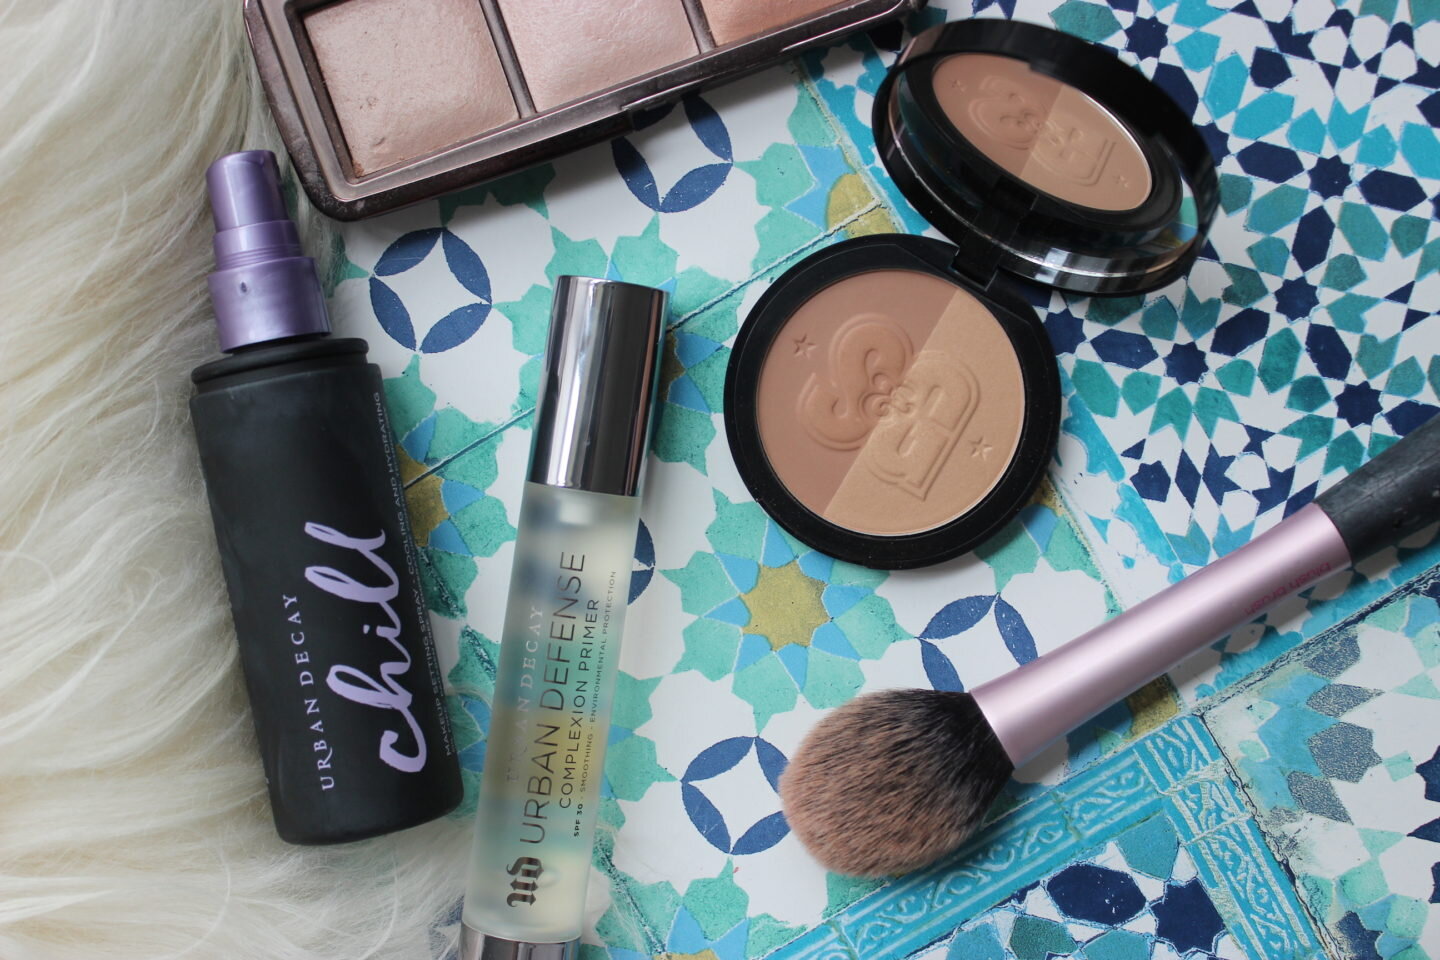 S&G GLOW ALL OUT URBAN DECAY CHILL PRIMER